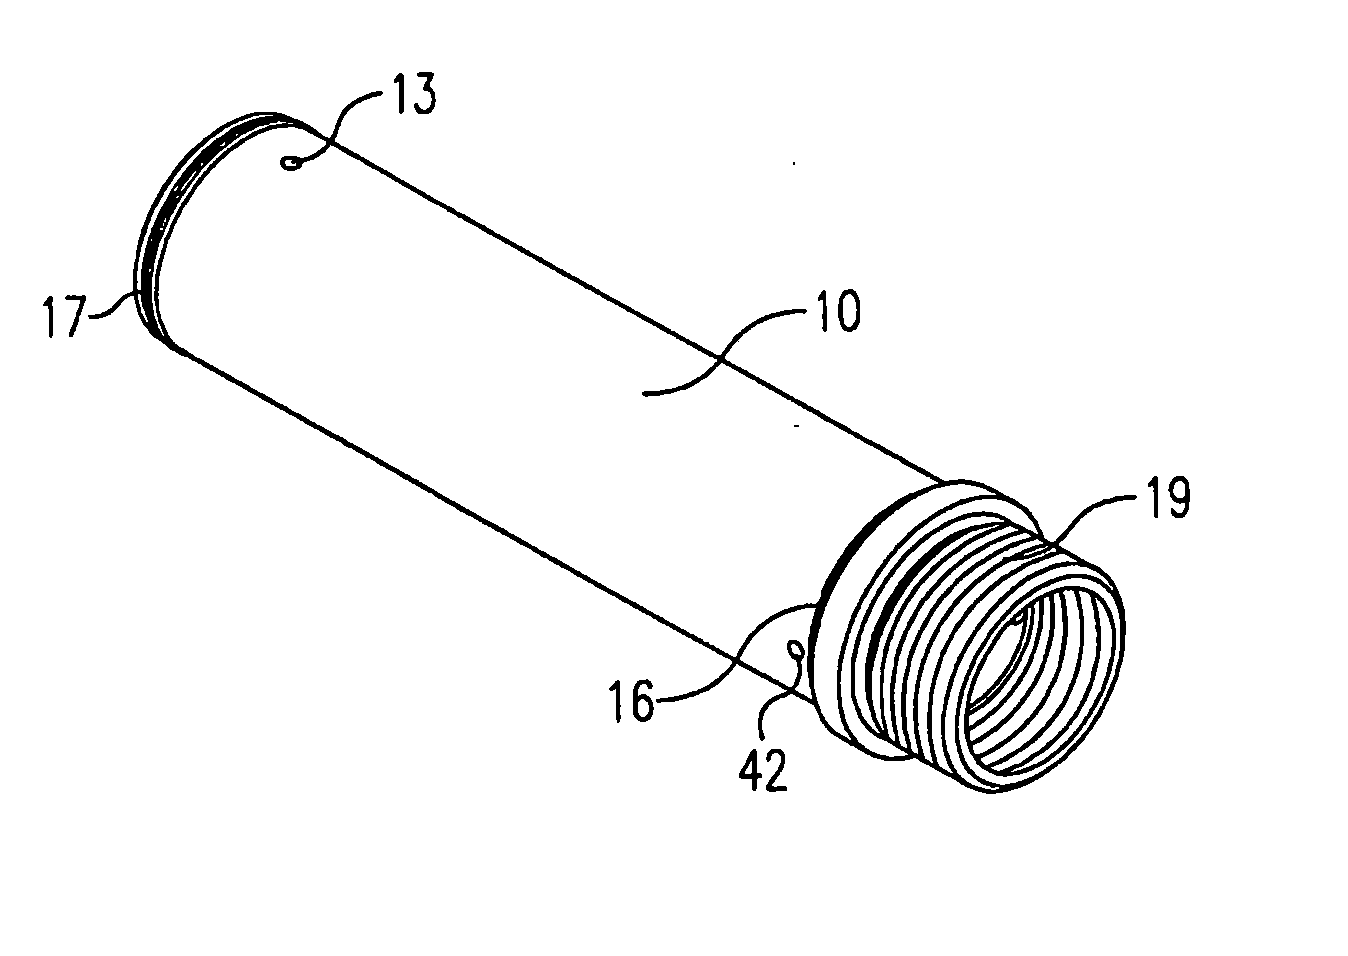 Pressure cylinder with composite piston rod and method for preparing a composite piston rod